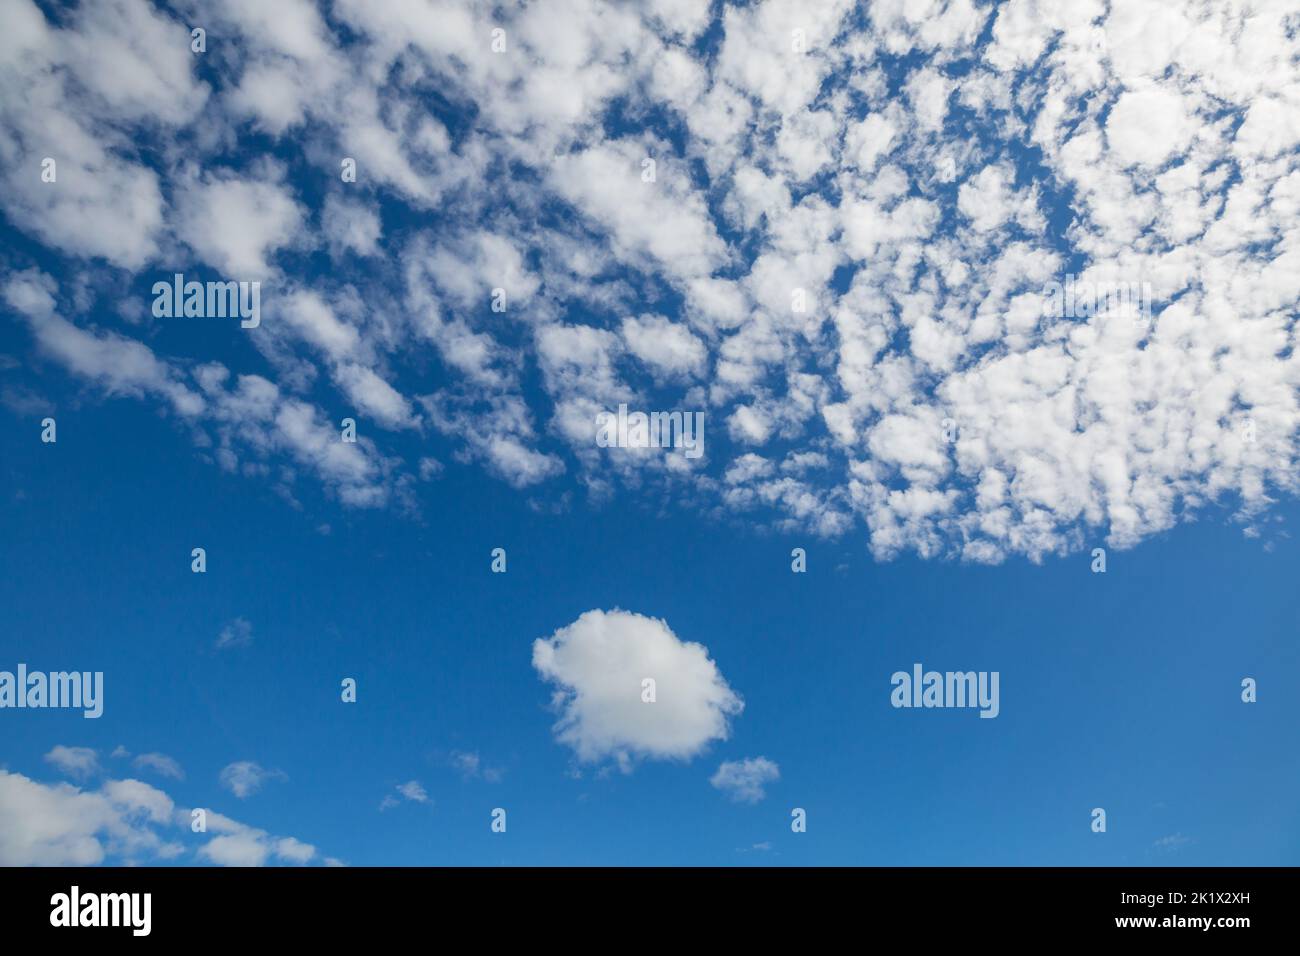 Sunny background, blue sky with white clouds, natural background. Stock Photo